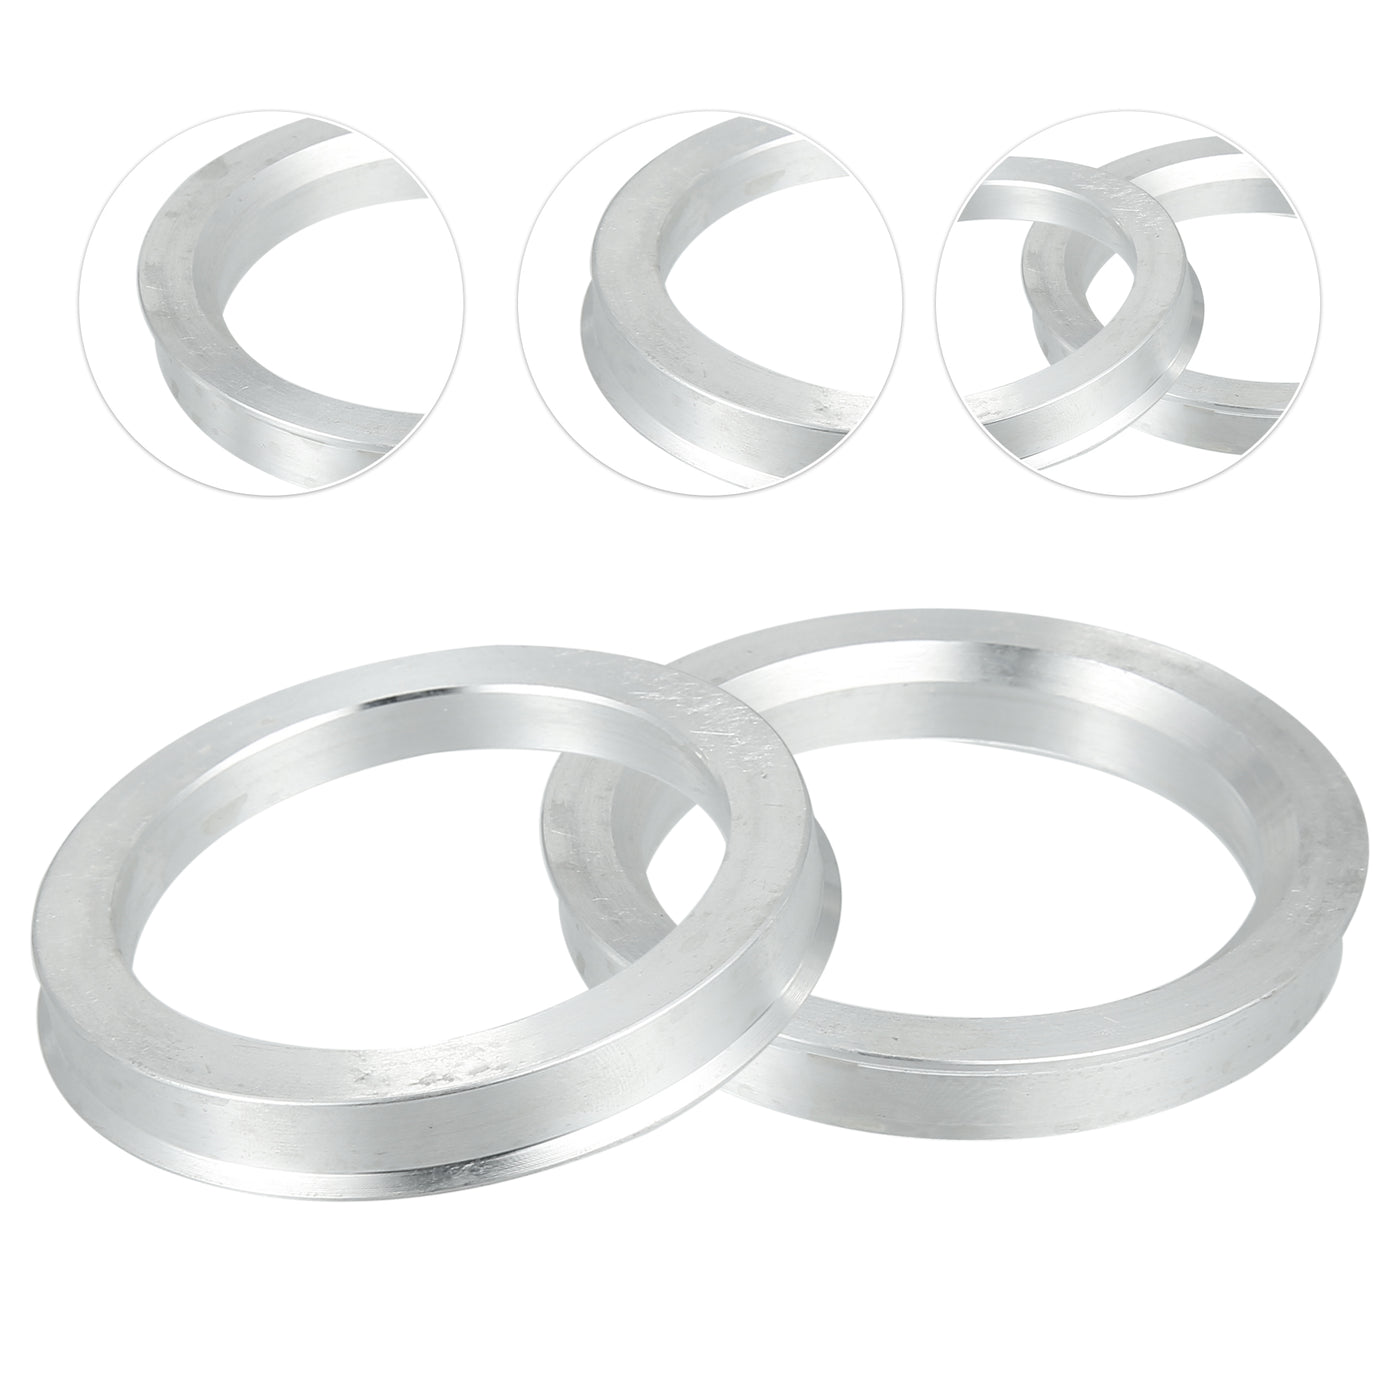 ACROPIX 71.6mm to 56.1mm Universal Car Hub Centric Rings Silver Tone - Pack of 4